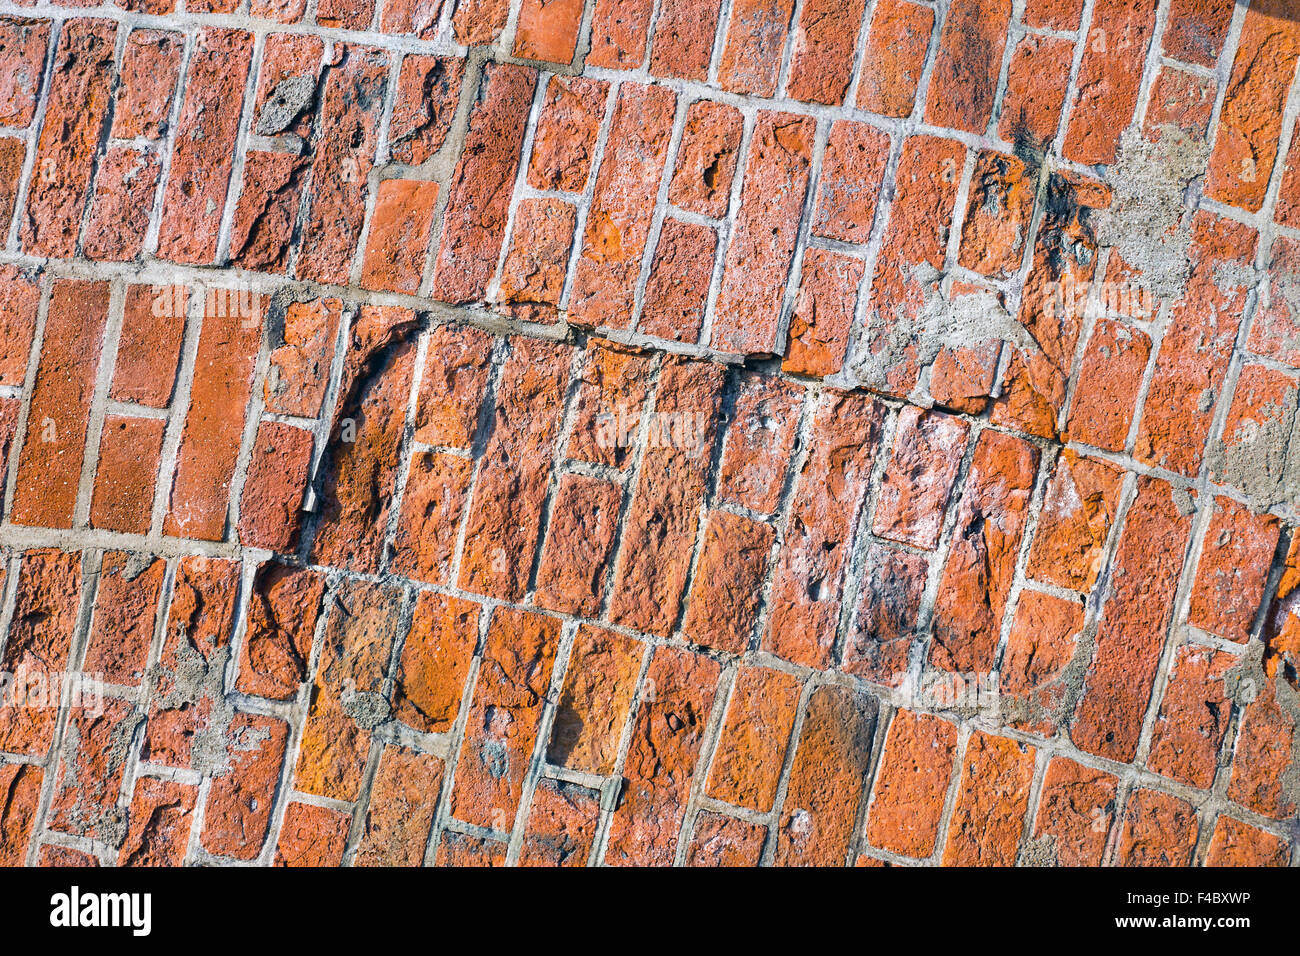 Rough red brickwall Stock Photo